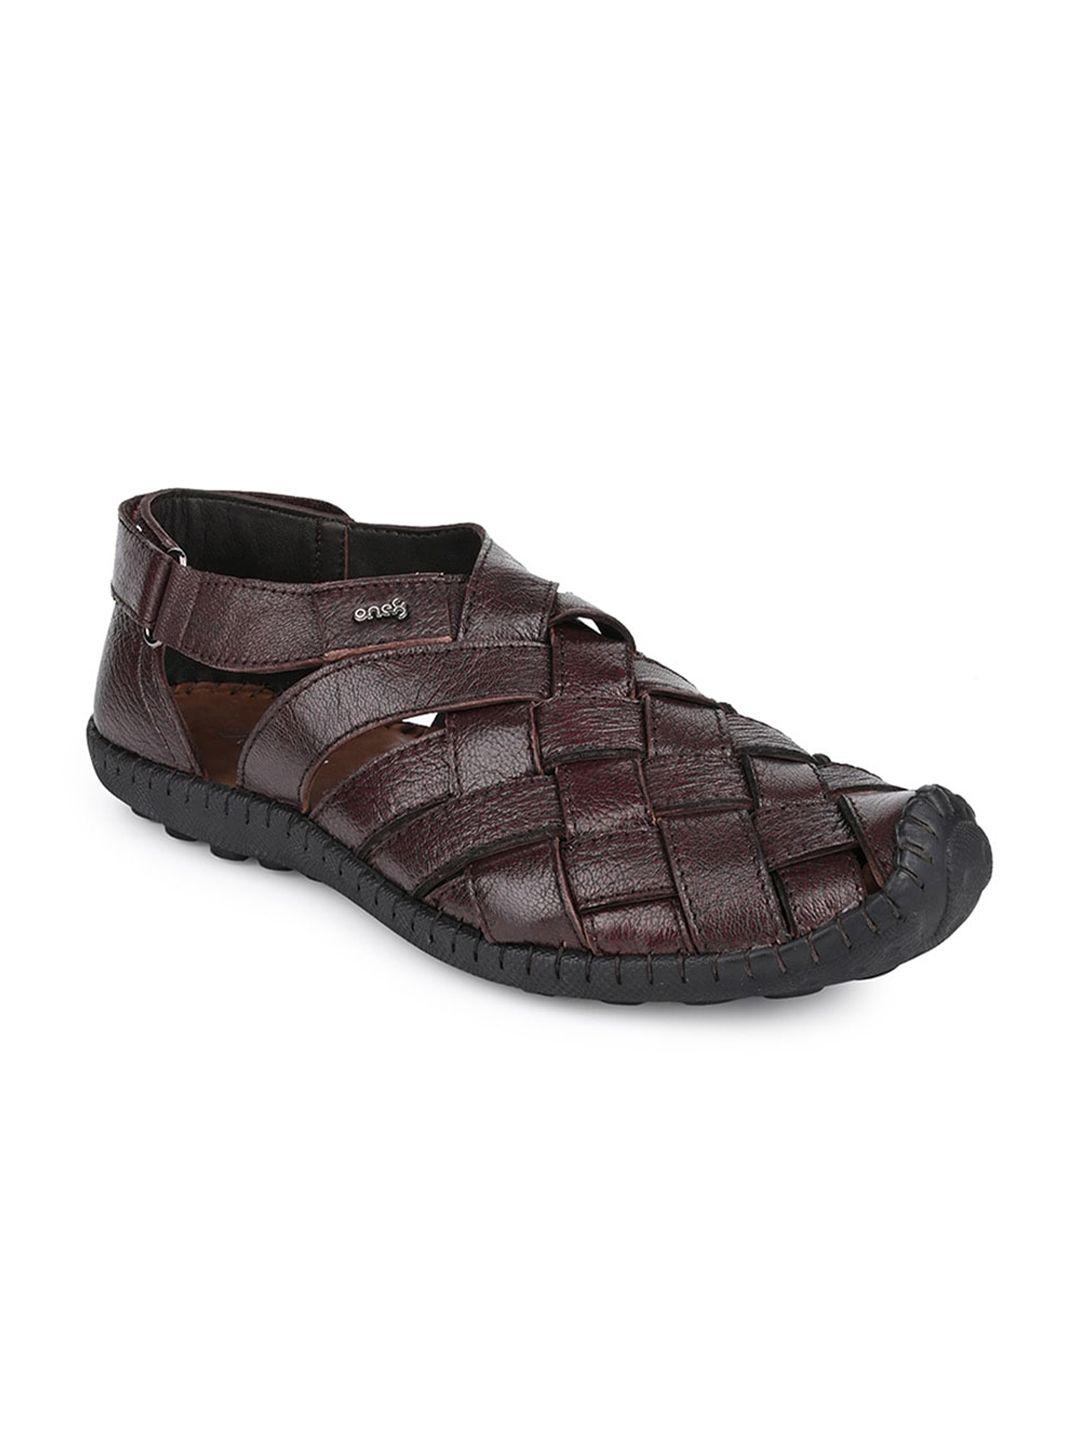 one8 men leather fisherman sandals